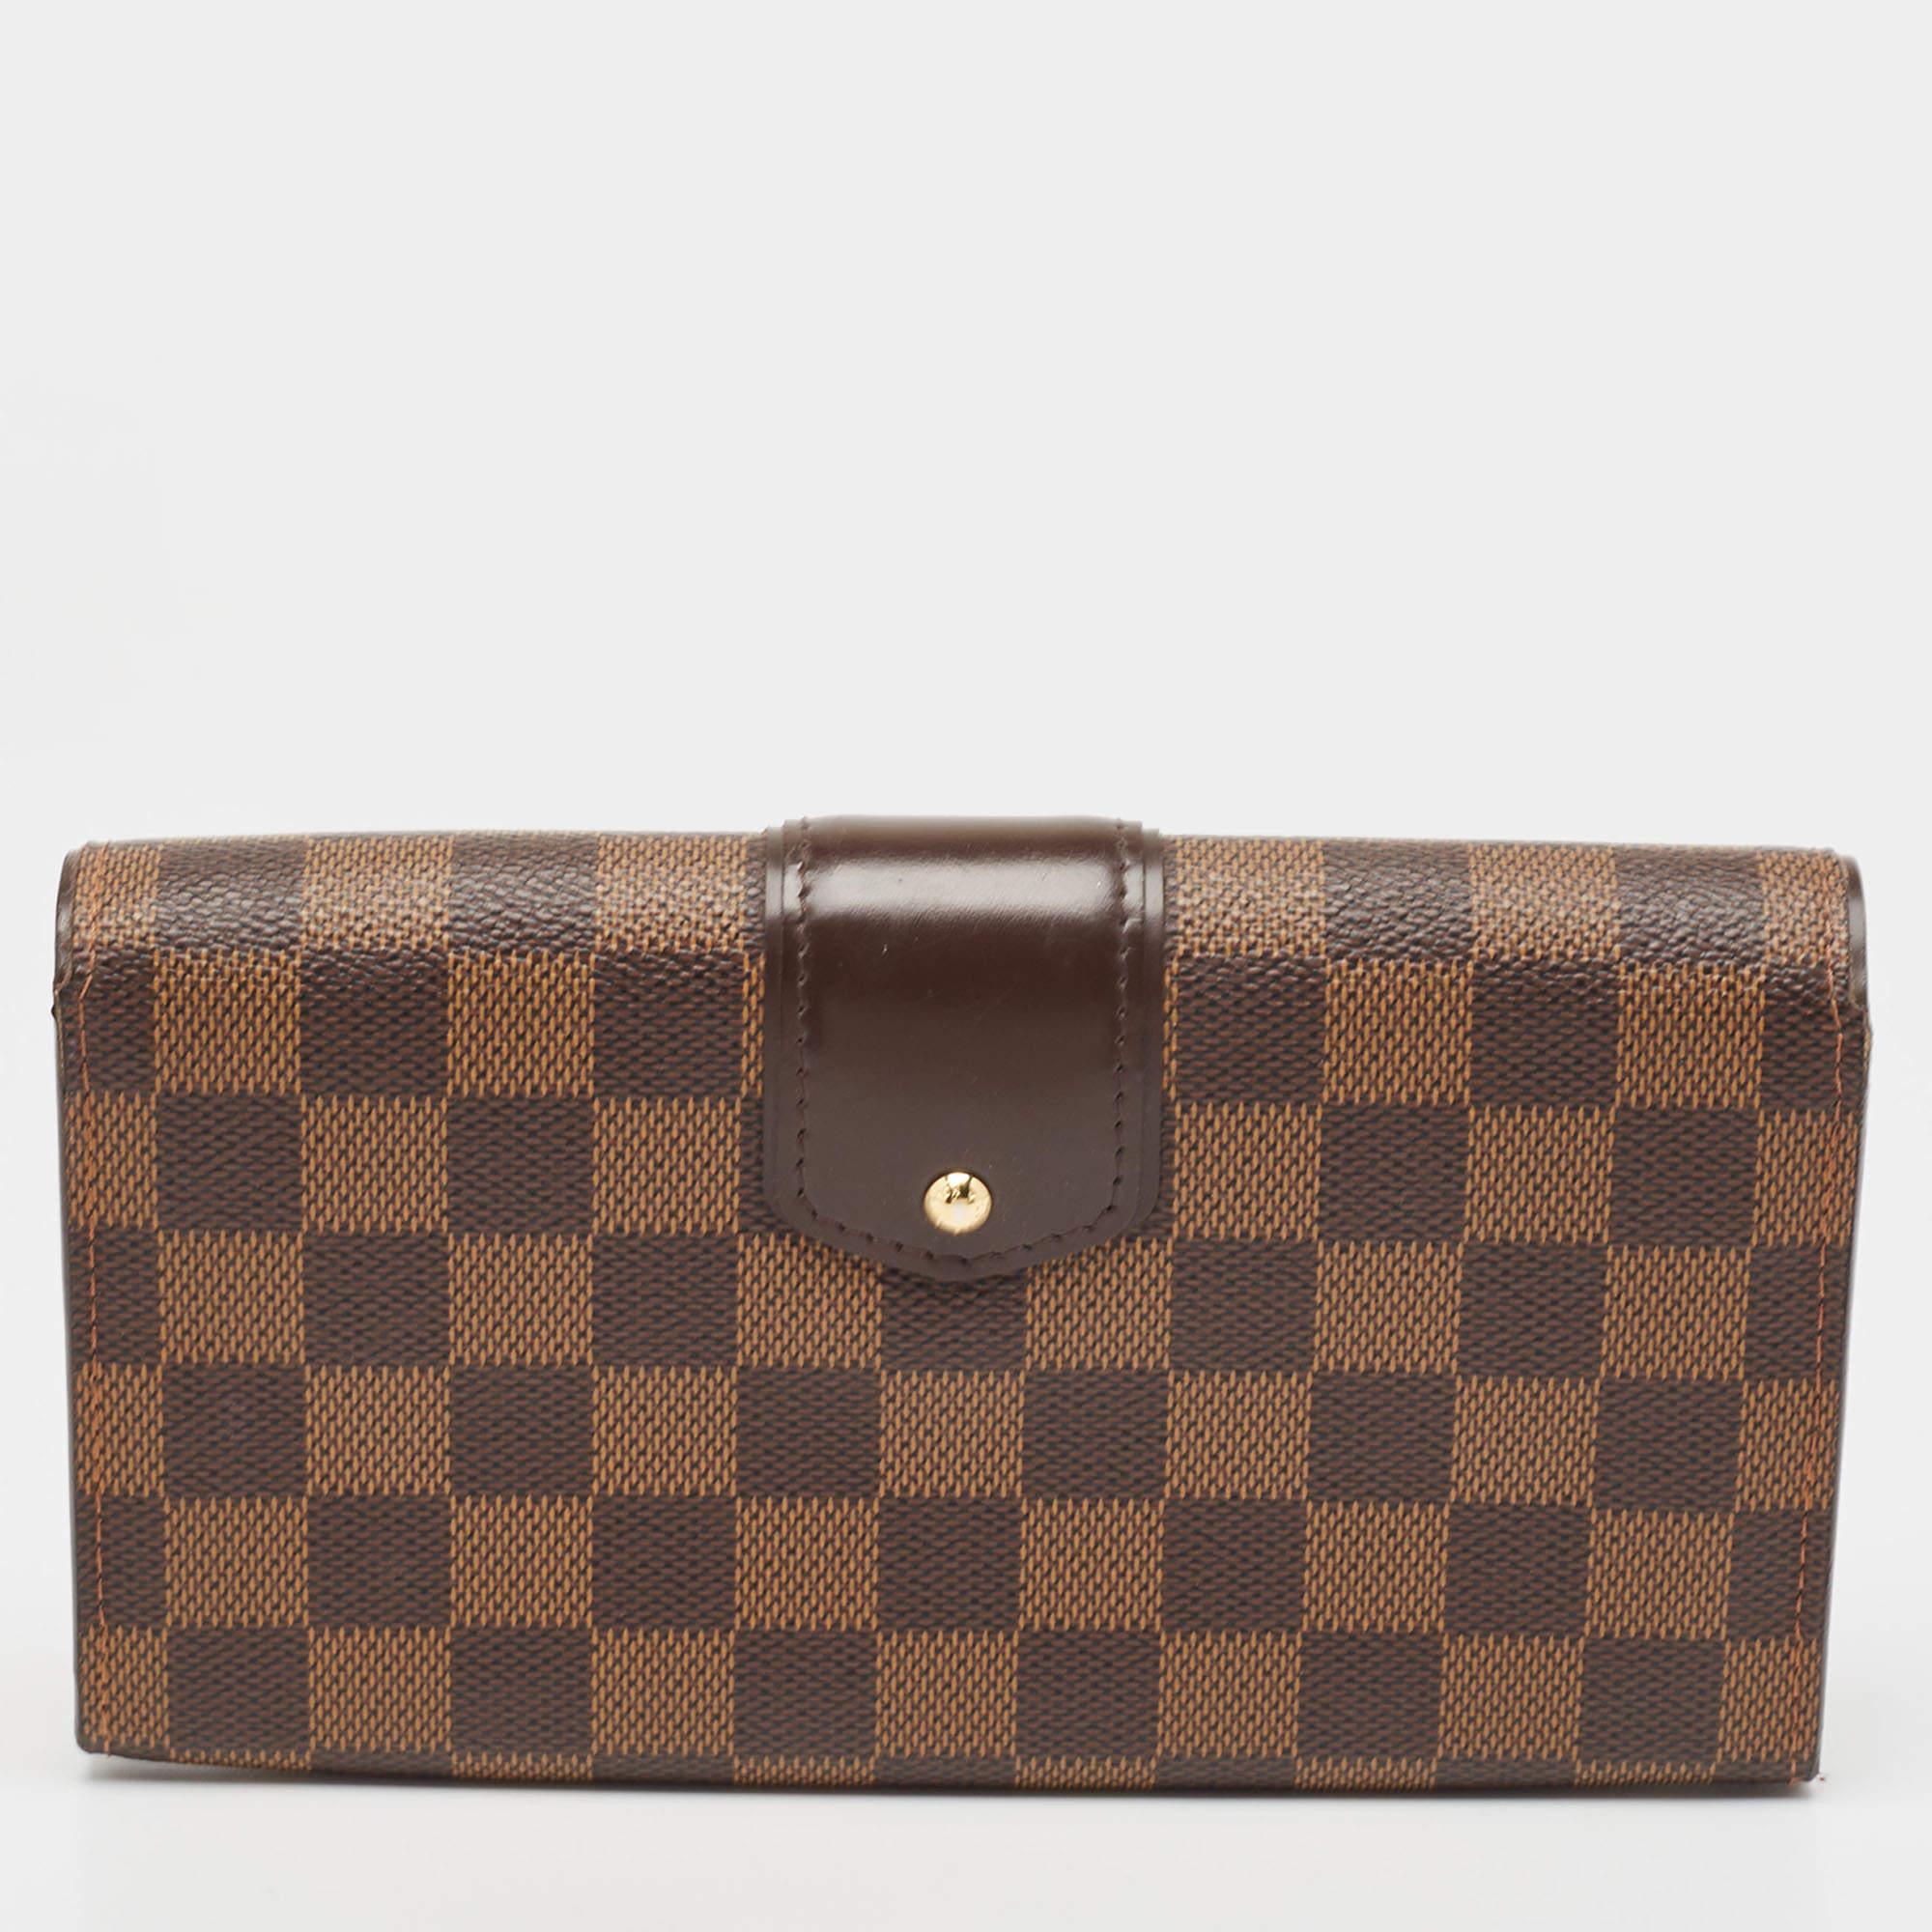 Carry this exquisite wallet by Louis Vuitton in any one of your handbags. Crafted from Damier canvas, it features a polished gold push lock. The interior features compartmentalized to secure your monetary essentials.

